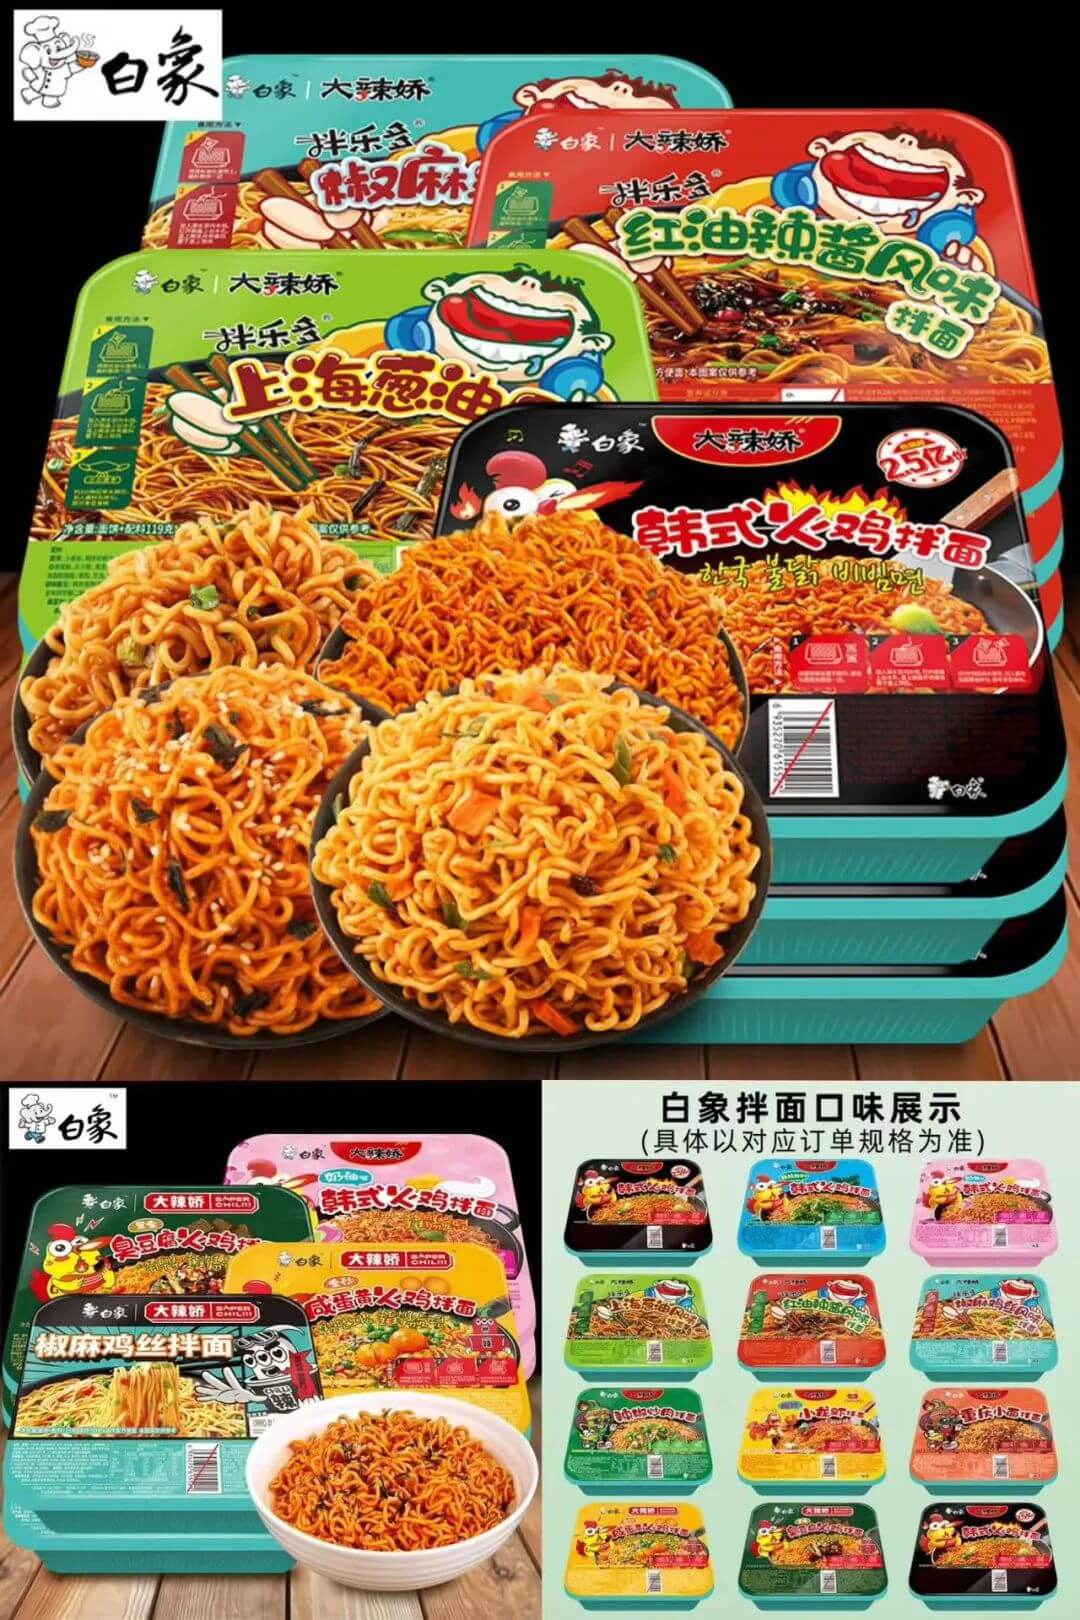  66268dfab5c41 - [4.9 yuan] Jelly+condom+spicy bittern snacks+turkey noodles+air pump+quick drying clothes+electric mosquito repellent incense